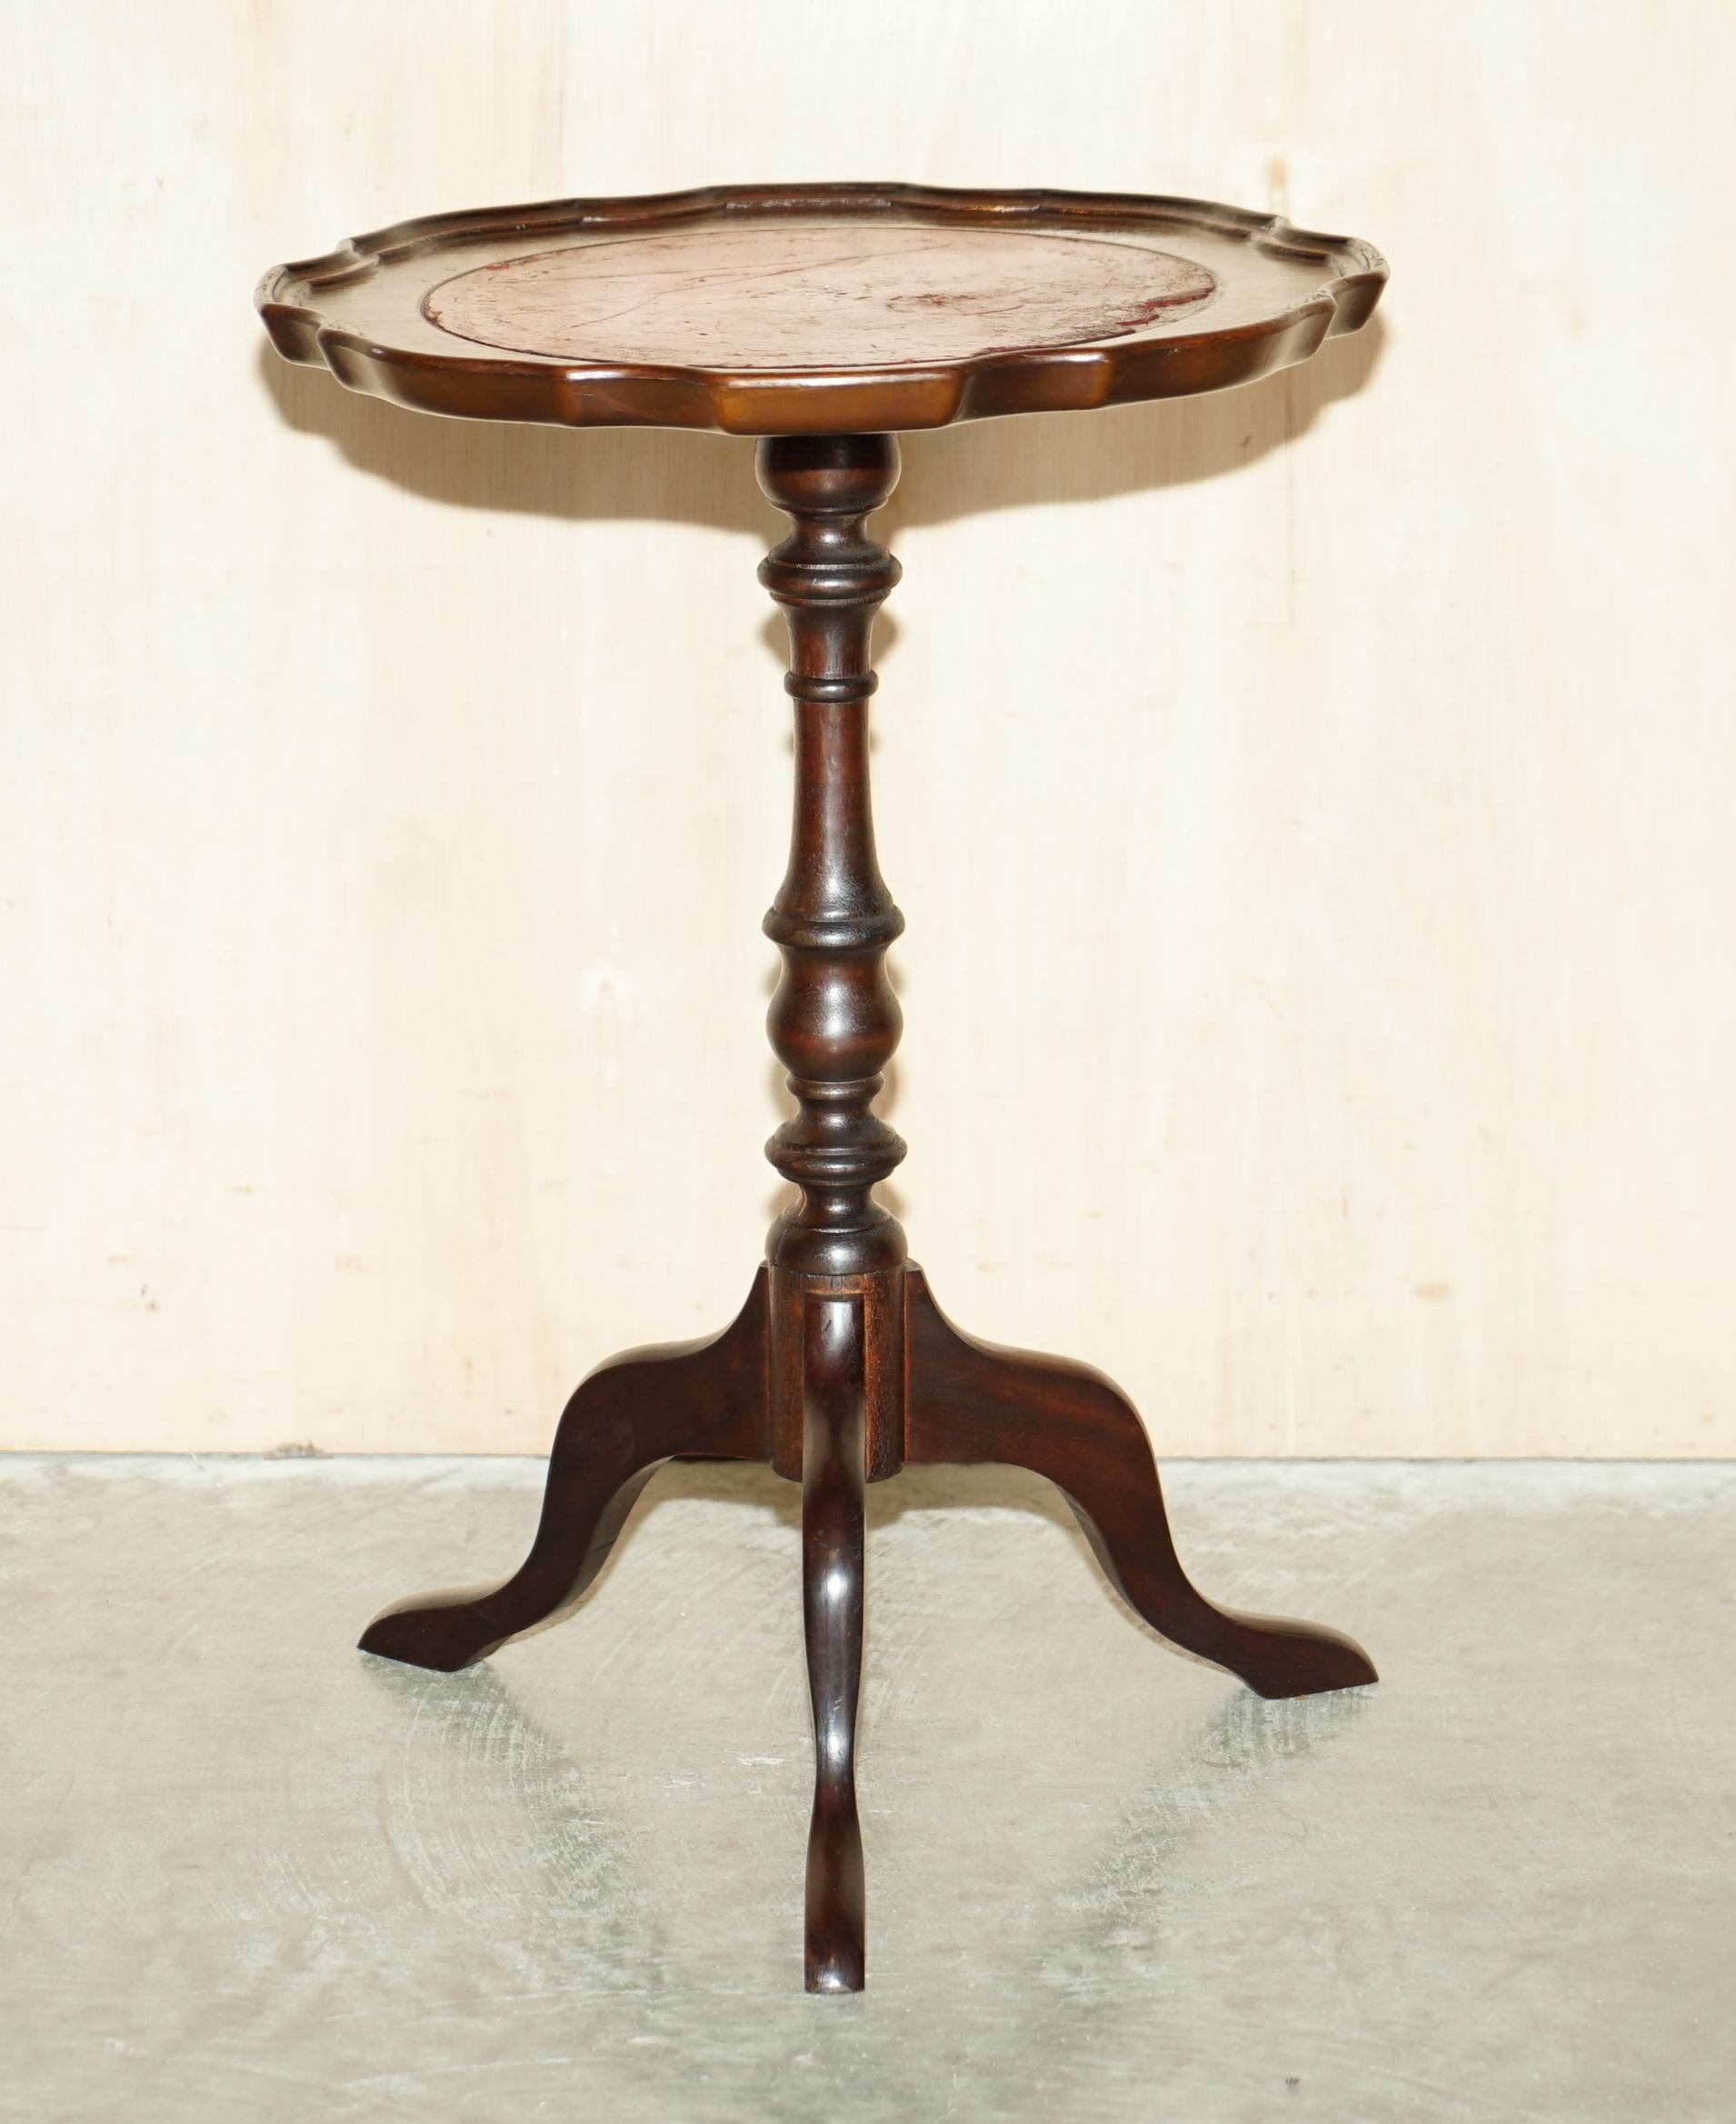 We are delighted to offer for sale this lovely vintage beech, Oxblood leather topped lamp or side table with silver leaf inlaid border 

A good-looking well-made tripod table in good, we have cleaned waxed and polished it from top to bottom, there